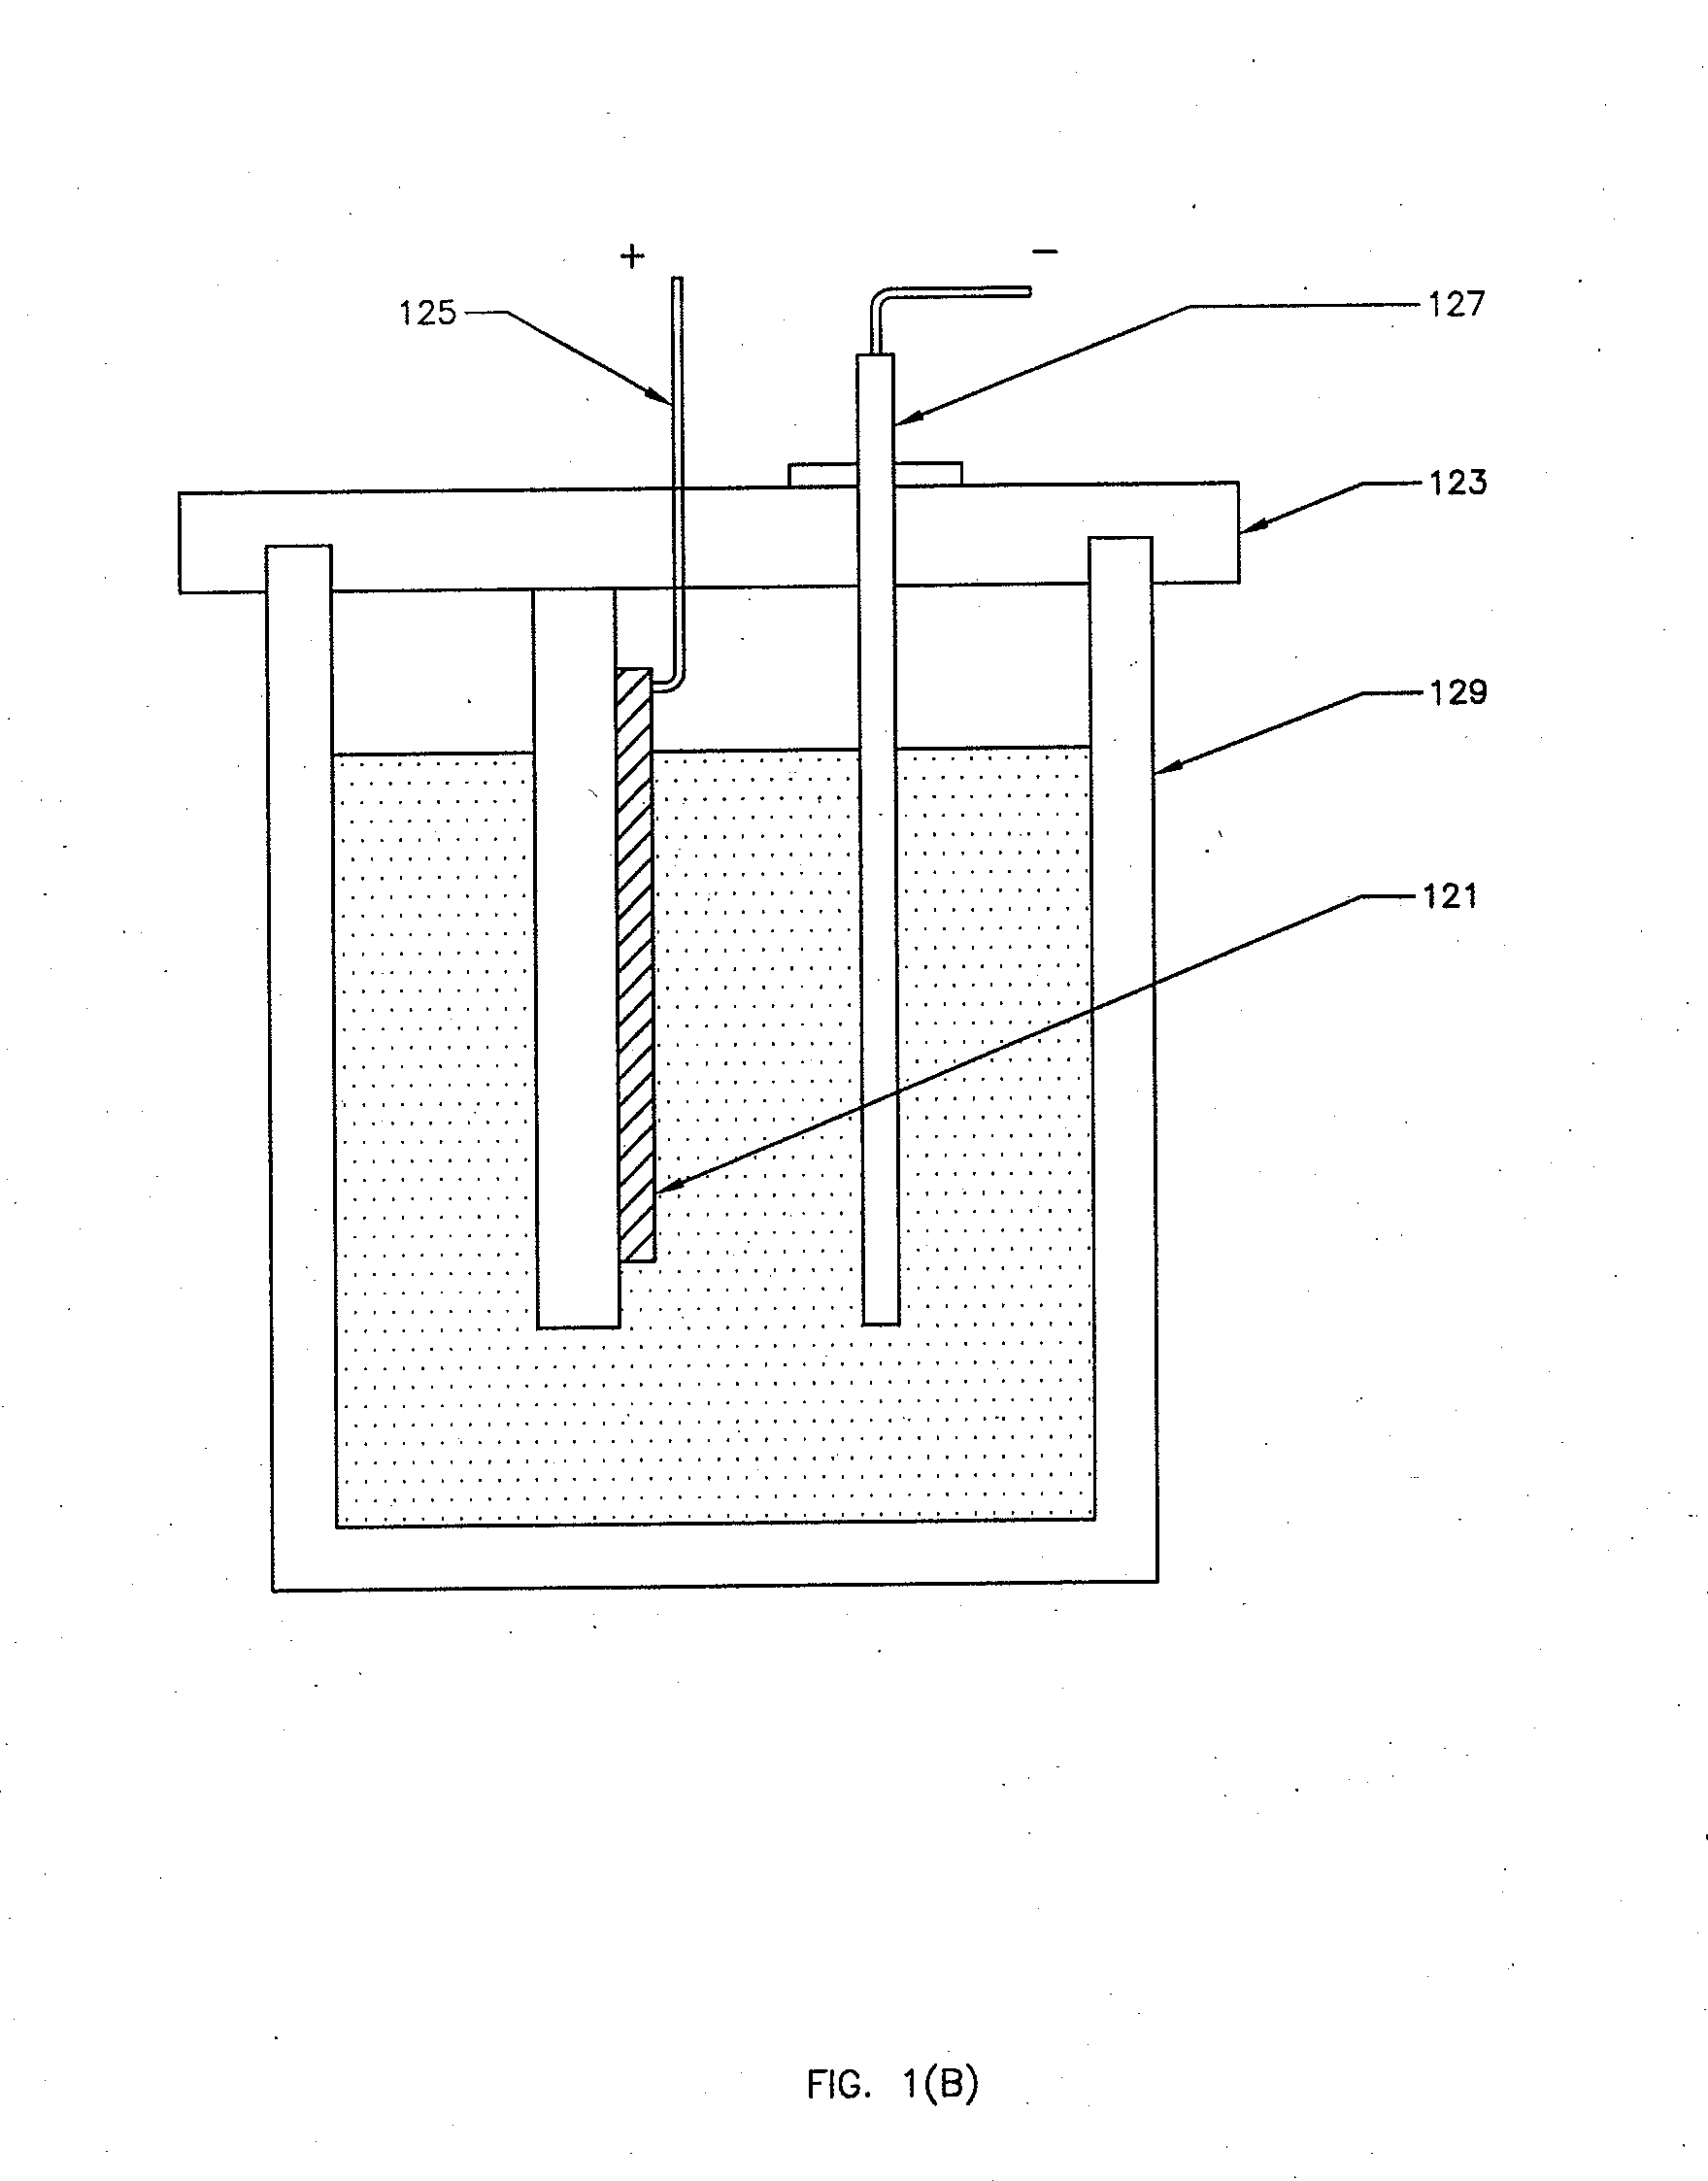 Light Emitting Diode Submount With High Thermal Conductivity For High Power Operation